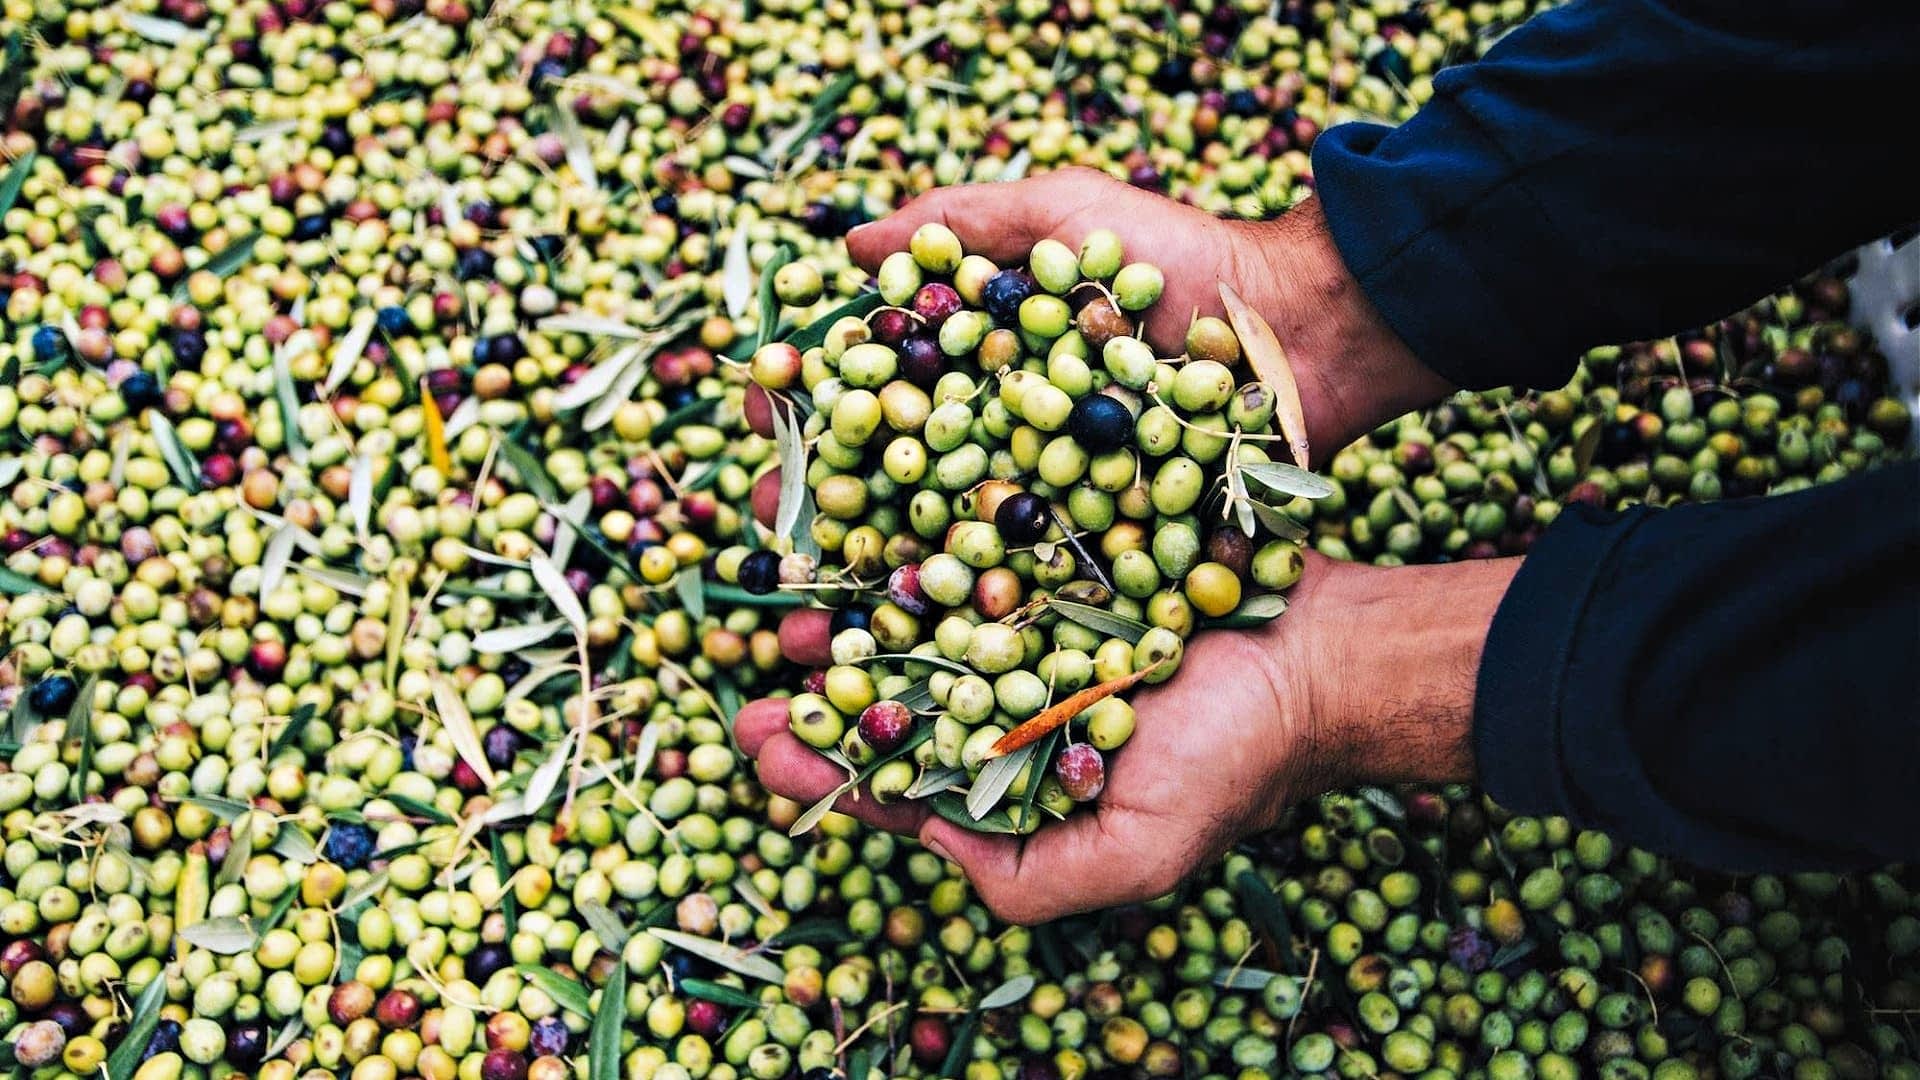 the-best-olive-olils-competitions-production-north-america-awards-for-california-producers-validate-high-evoo-standards-olive-oil-times